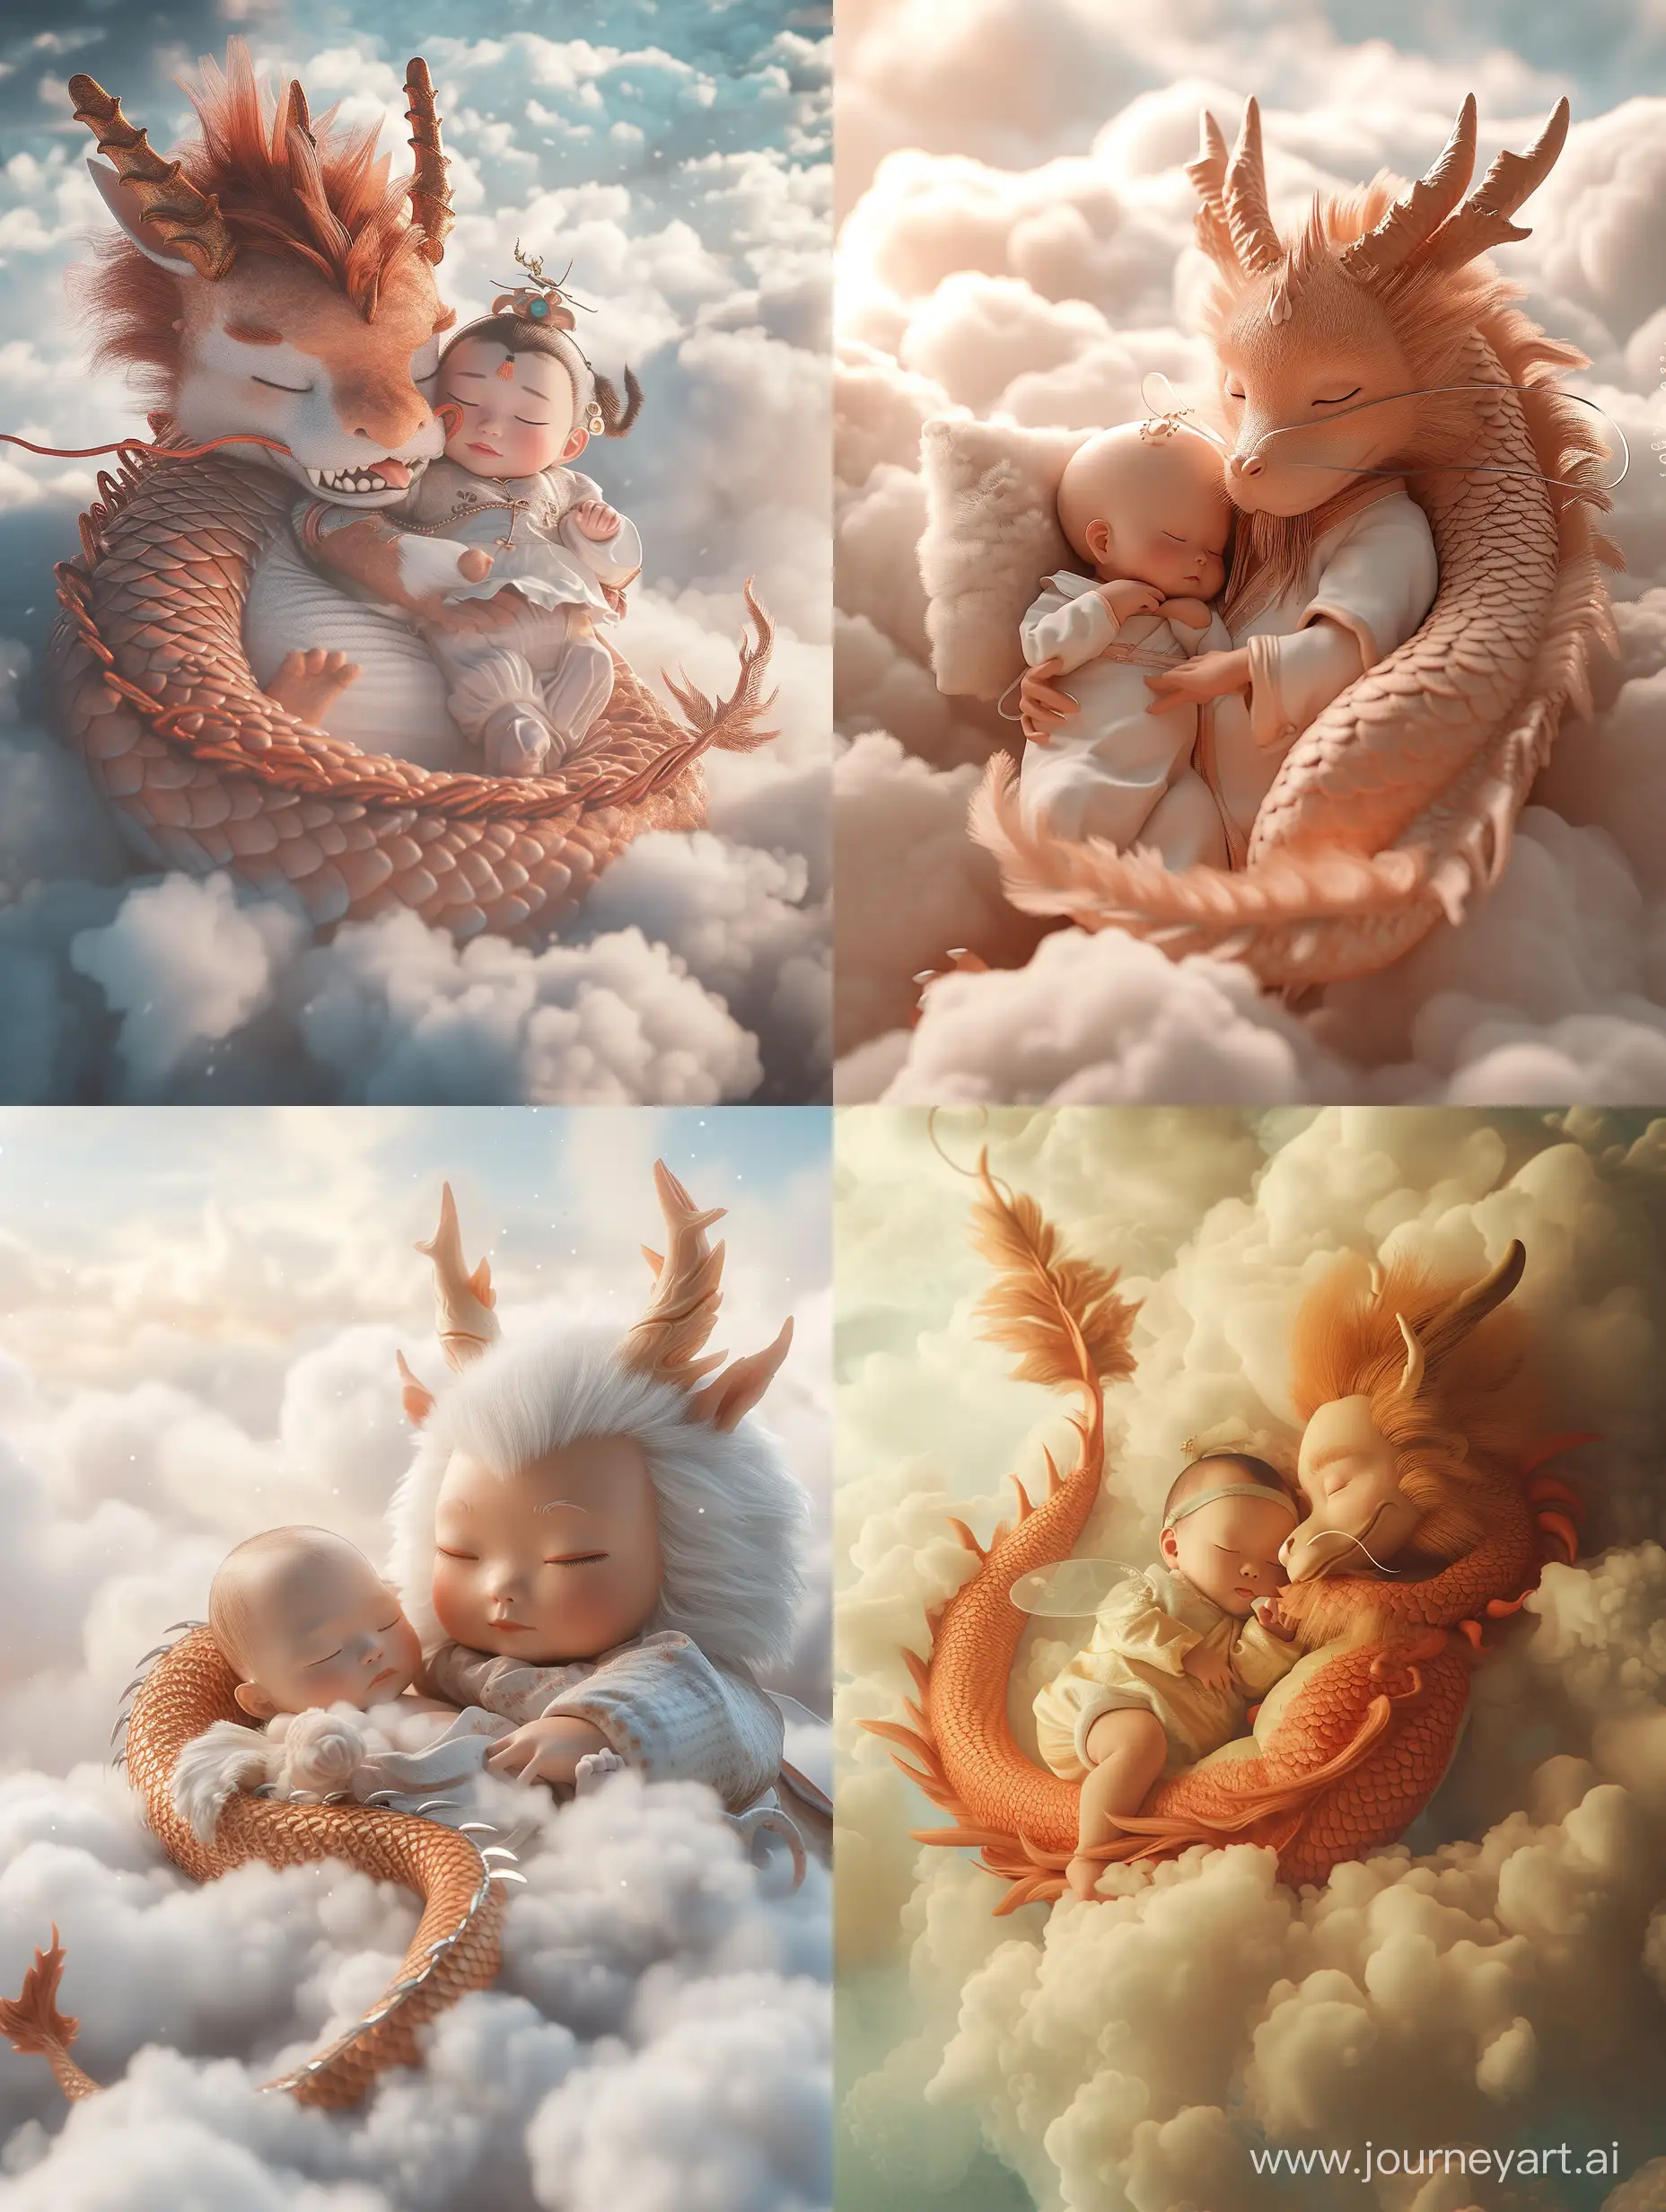 Adorable-Baby-and-Dragon-Sleeping-in-Clouds-Translucent-Glass-Anime-Aesthetic